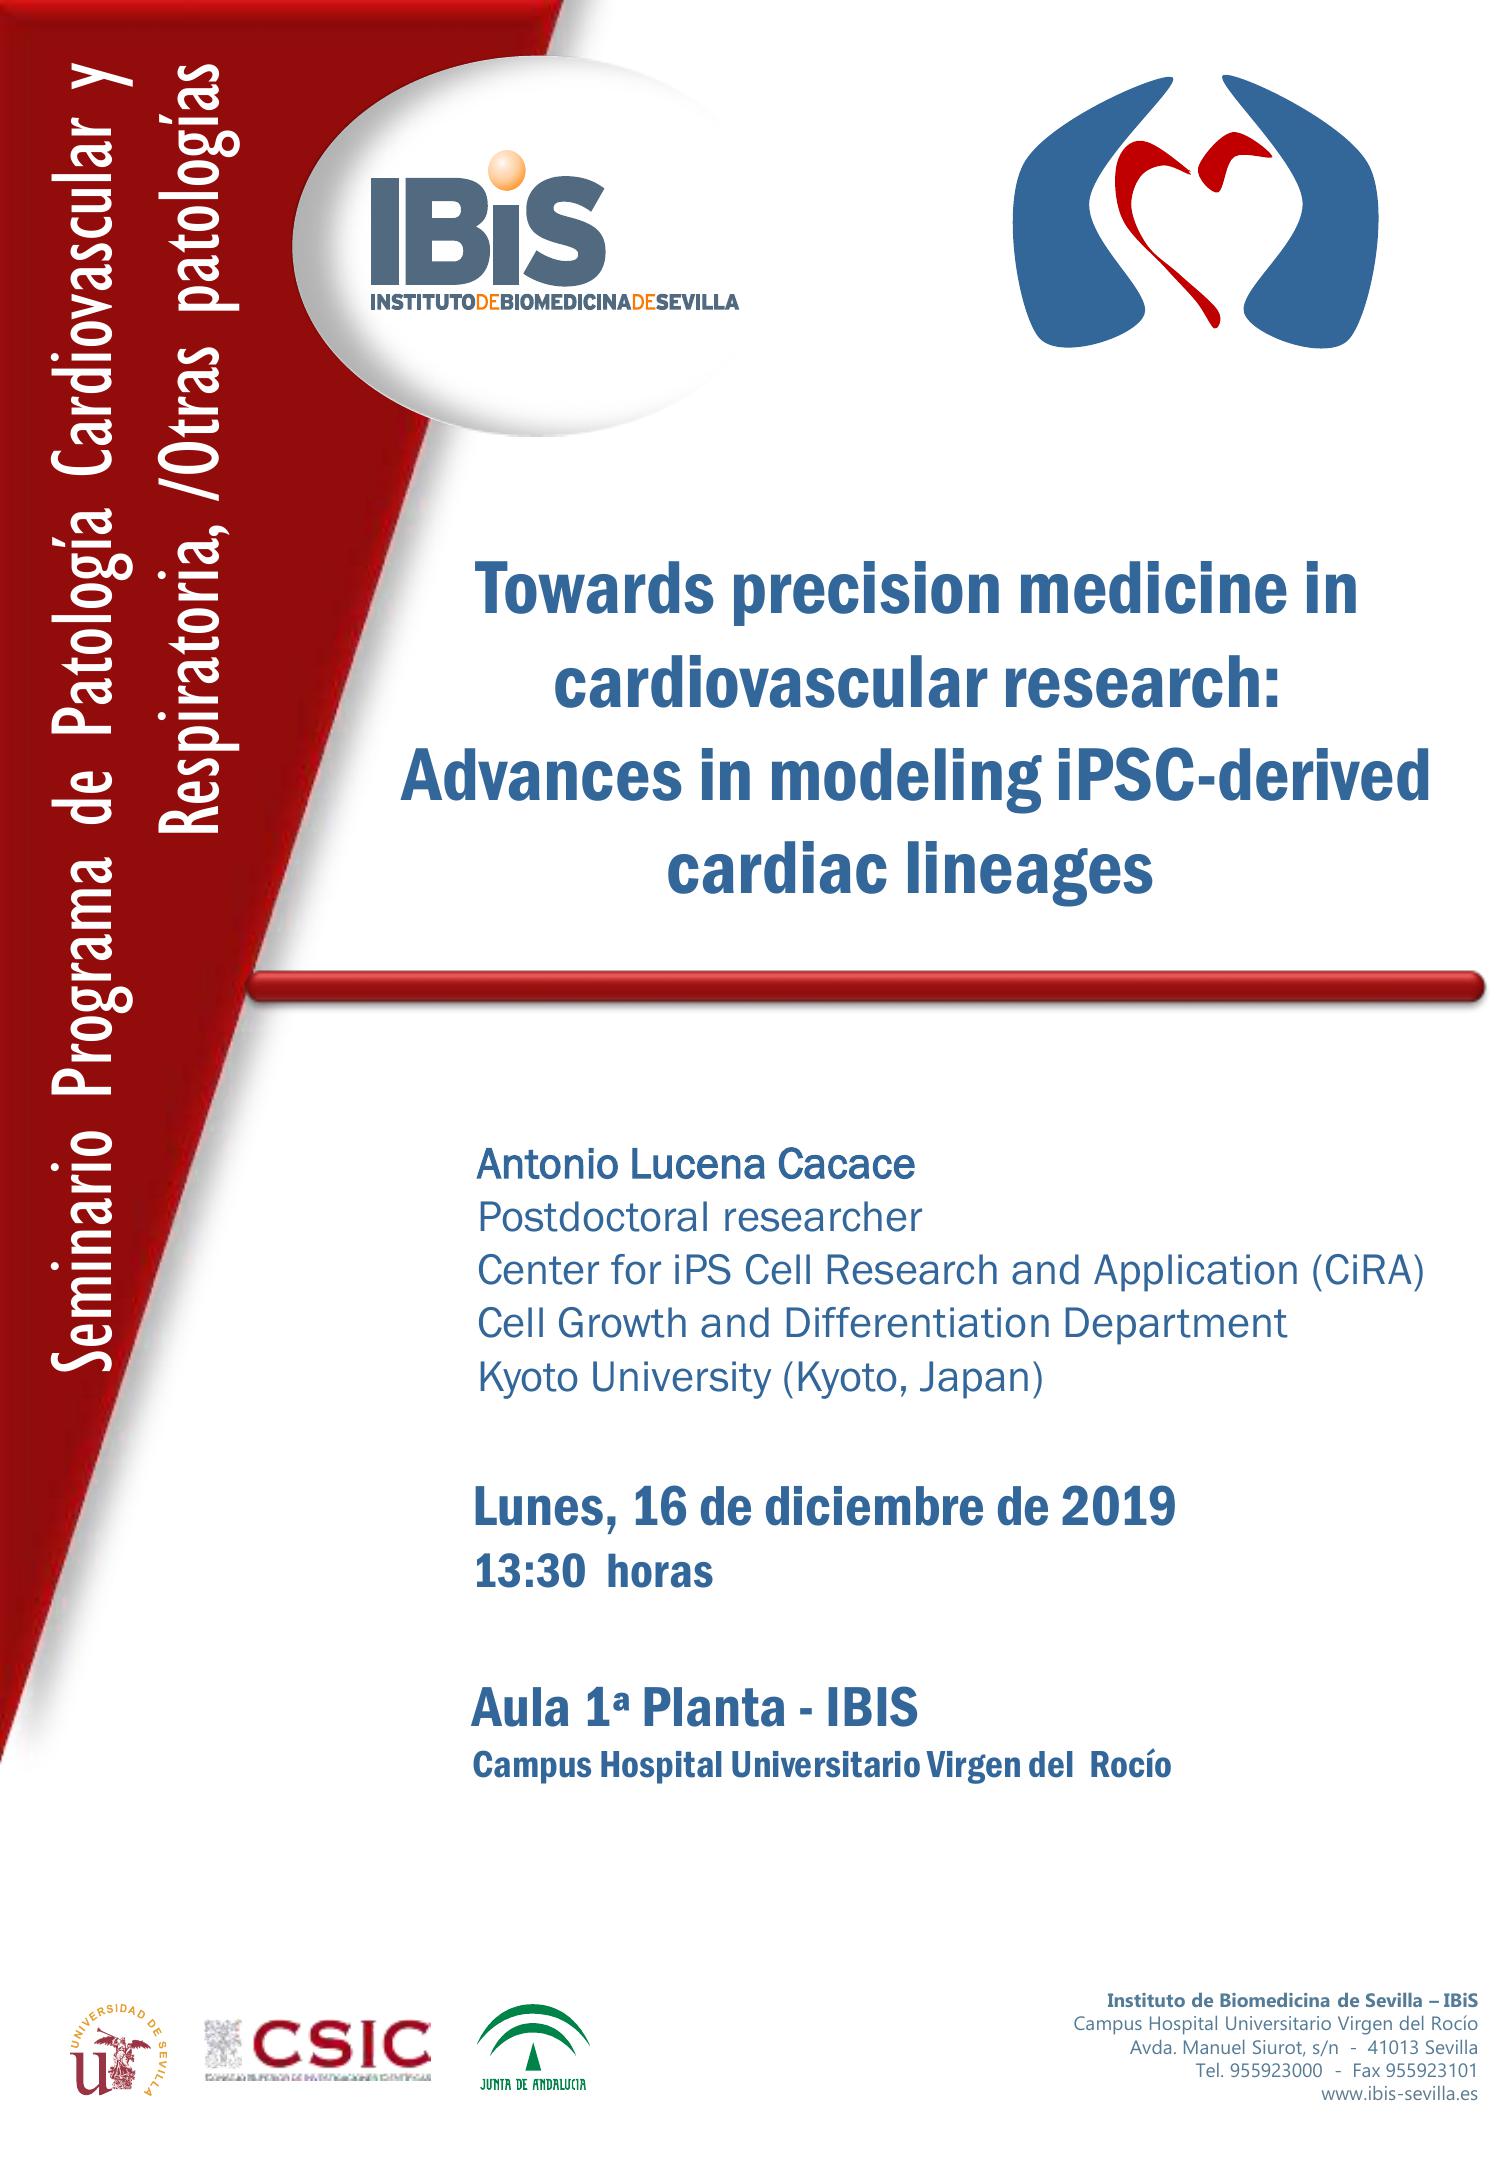 Poster: Towards precision medicine in cardiovascular research: Advances in modeling iPSC-derived cardiac lineages